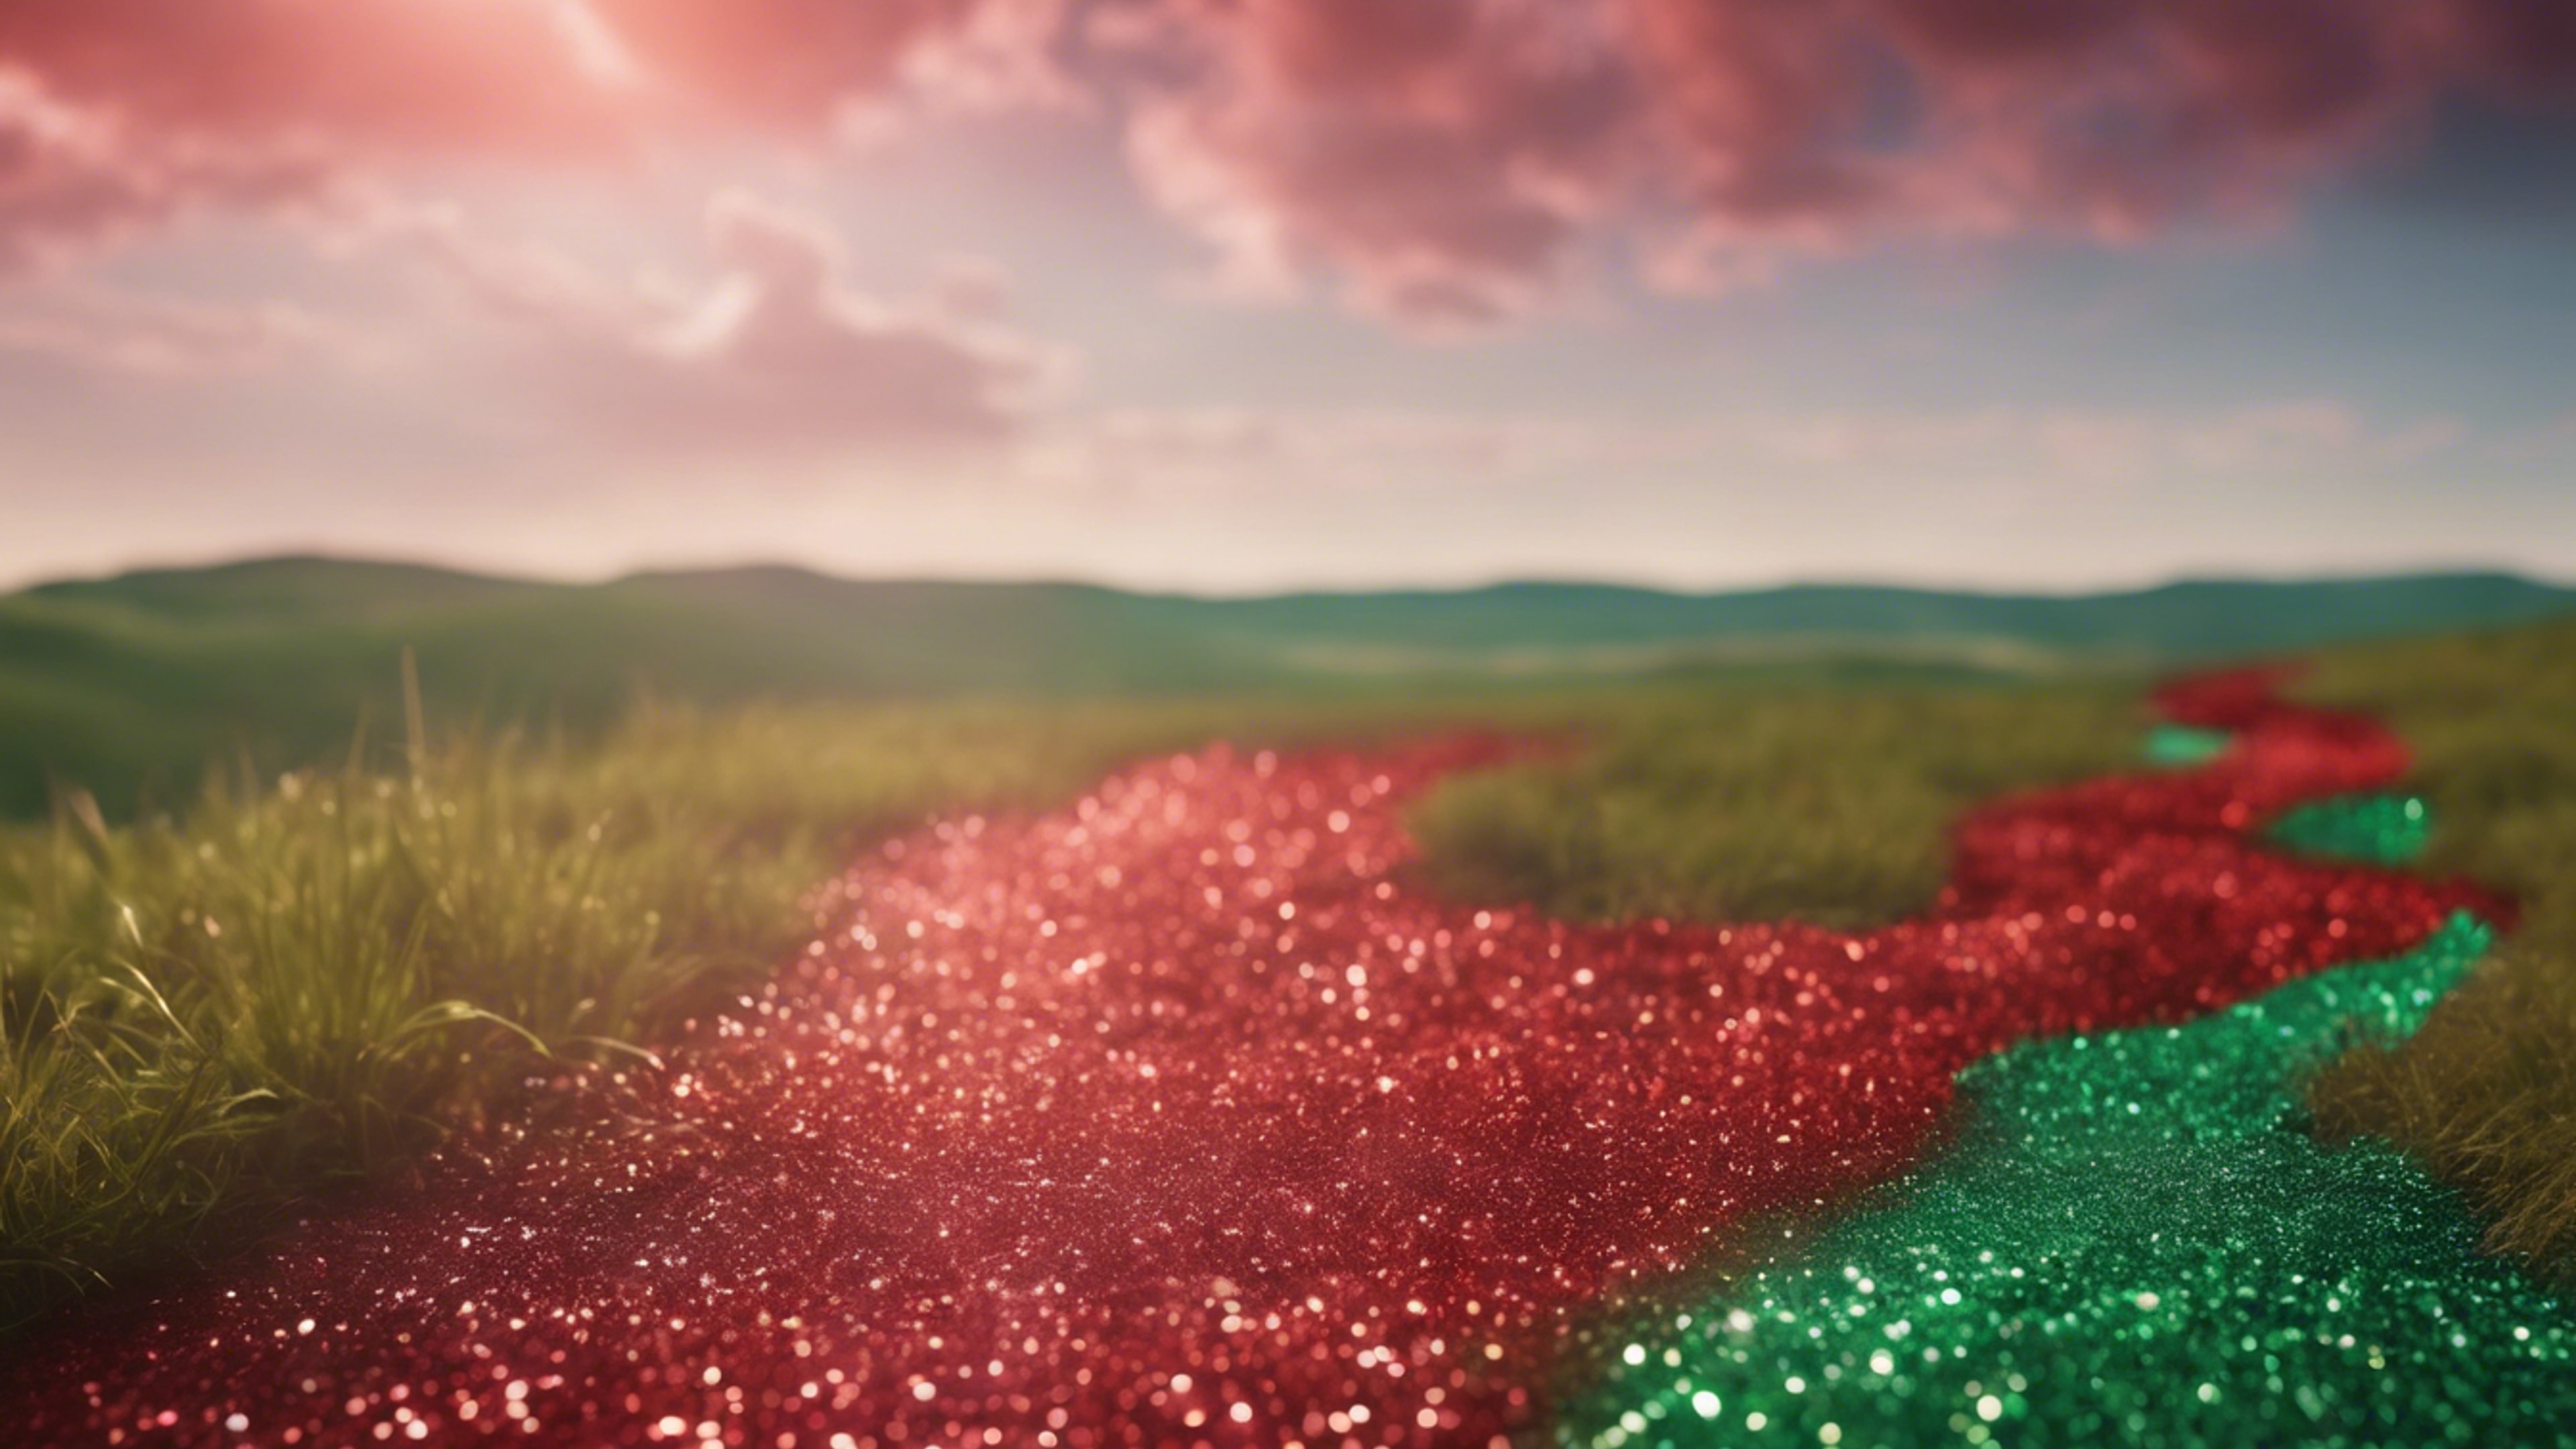 Path of shiny green and red glitter towards the horizon Валлпапер[4b670e6c3f1f43adb6d1]